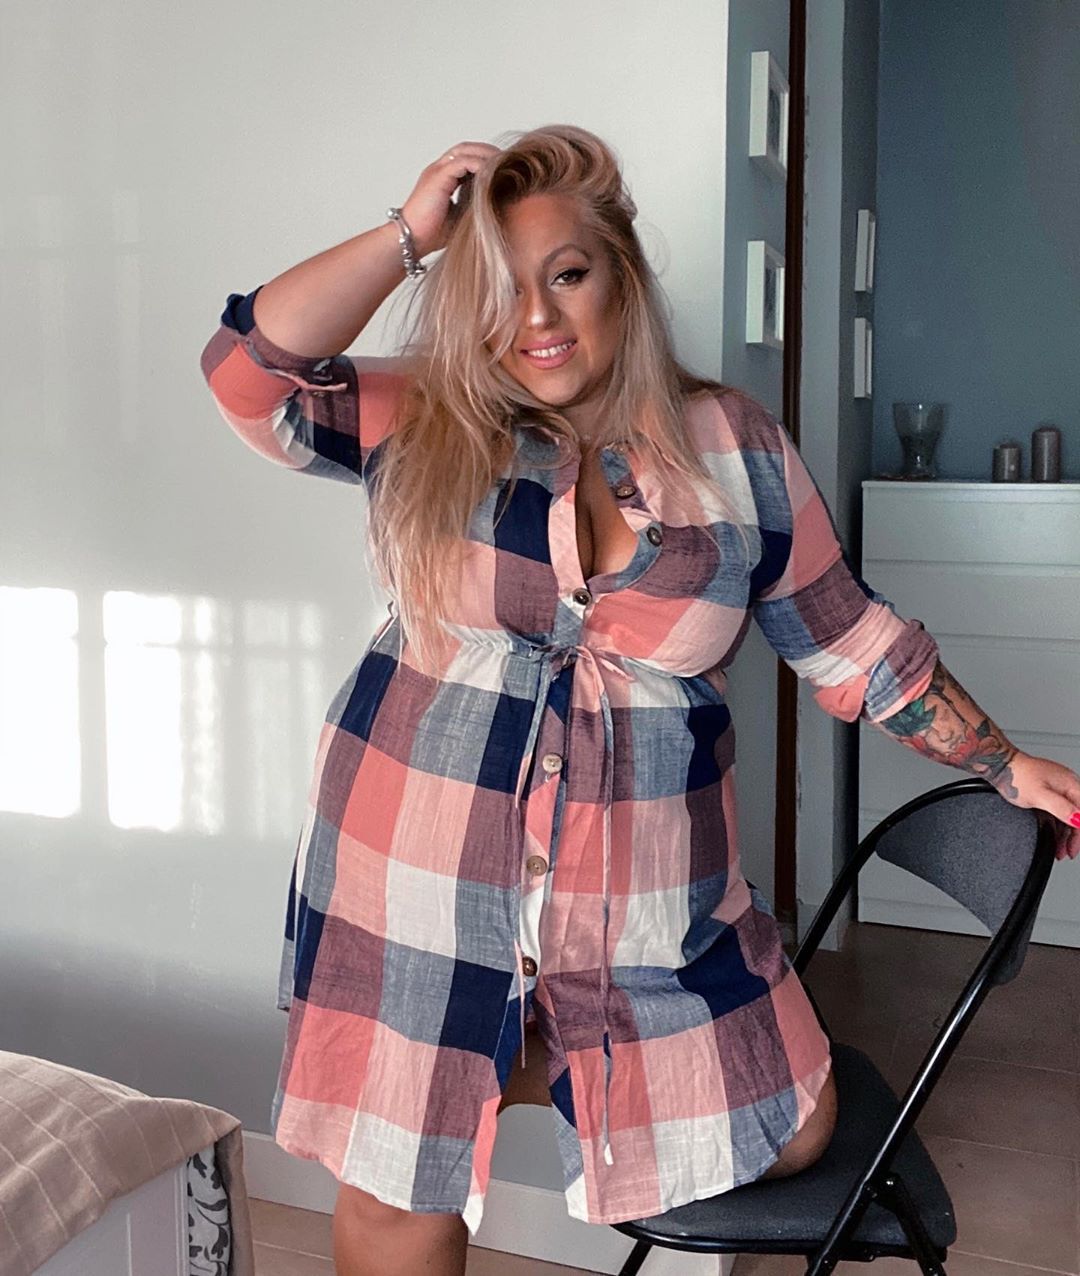 Rosegal - Plus size dresses⁣
Search ID: 469145803⁣
Price: $24.99⁣
@lau_onieva⁣
⁣
WEEKEND MADNESS⁣
BUY 1 GET 1 FREE！⁣
 👉Bio link⁣
Use Code: RGH20 to enjoy 18% off!⁣
#rosegal #plussizefashion #Rosegalcu...